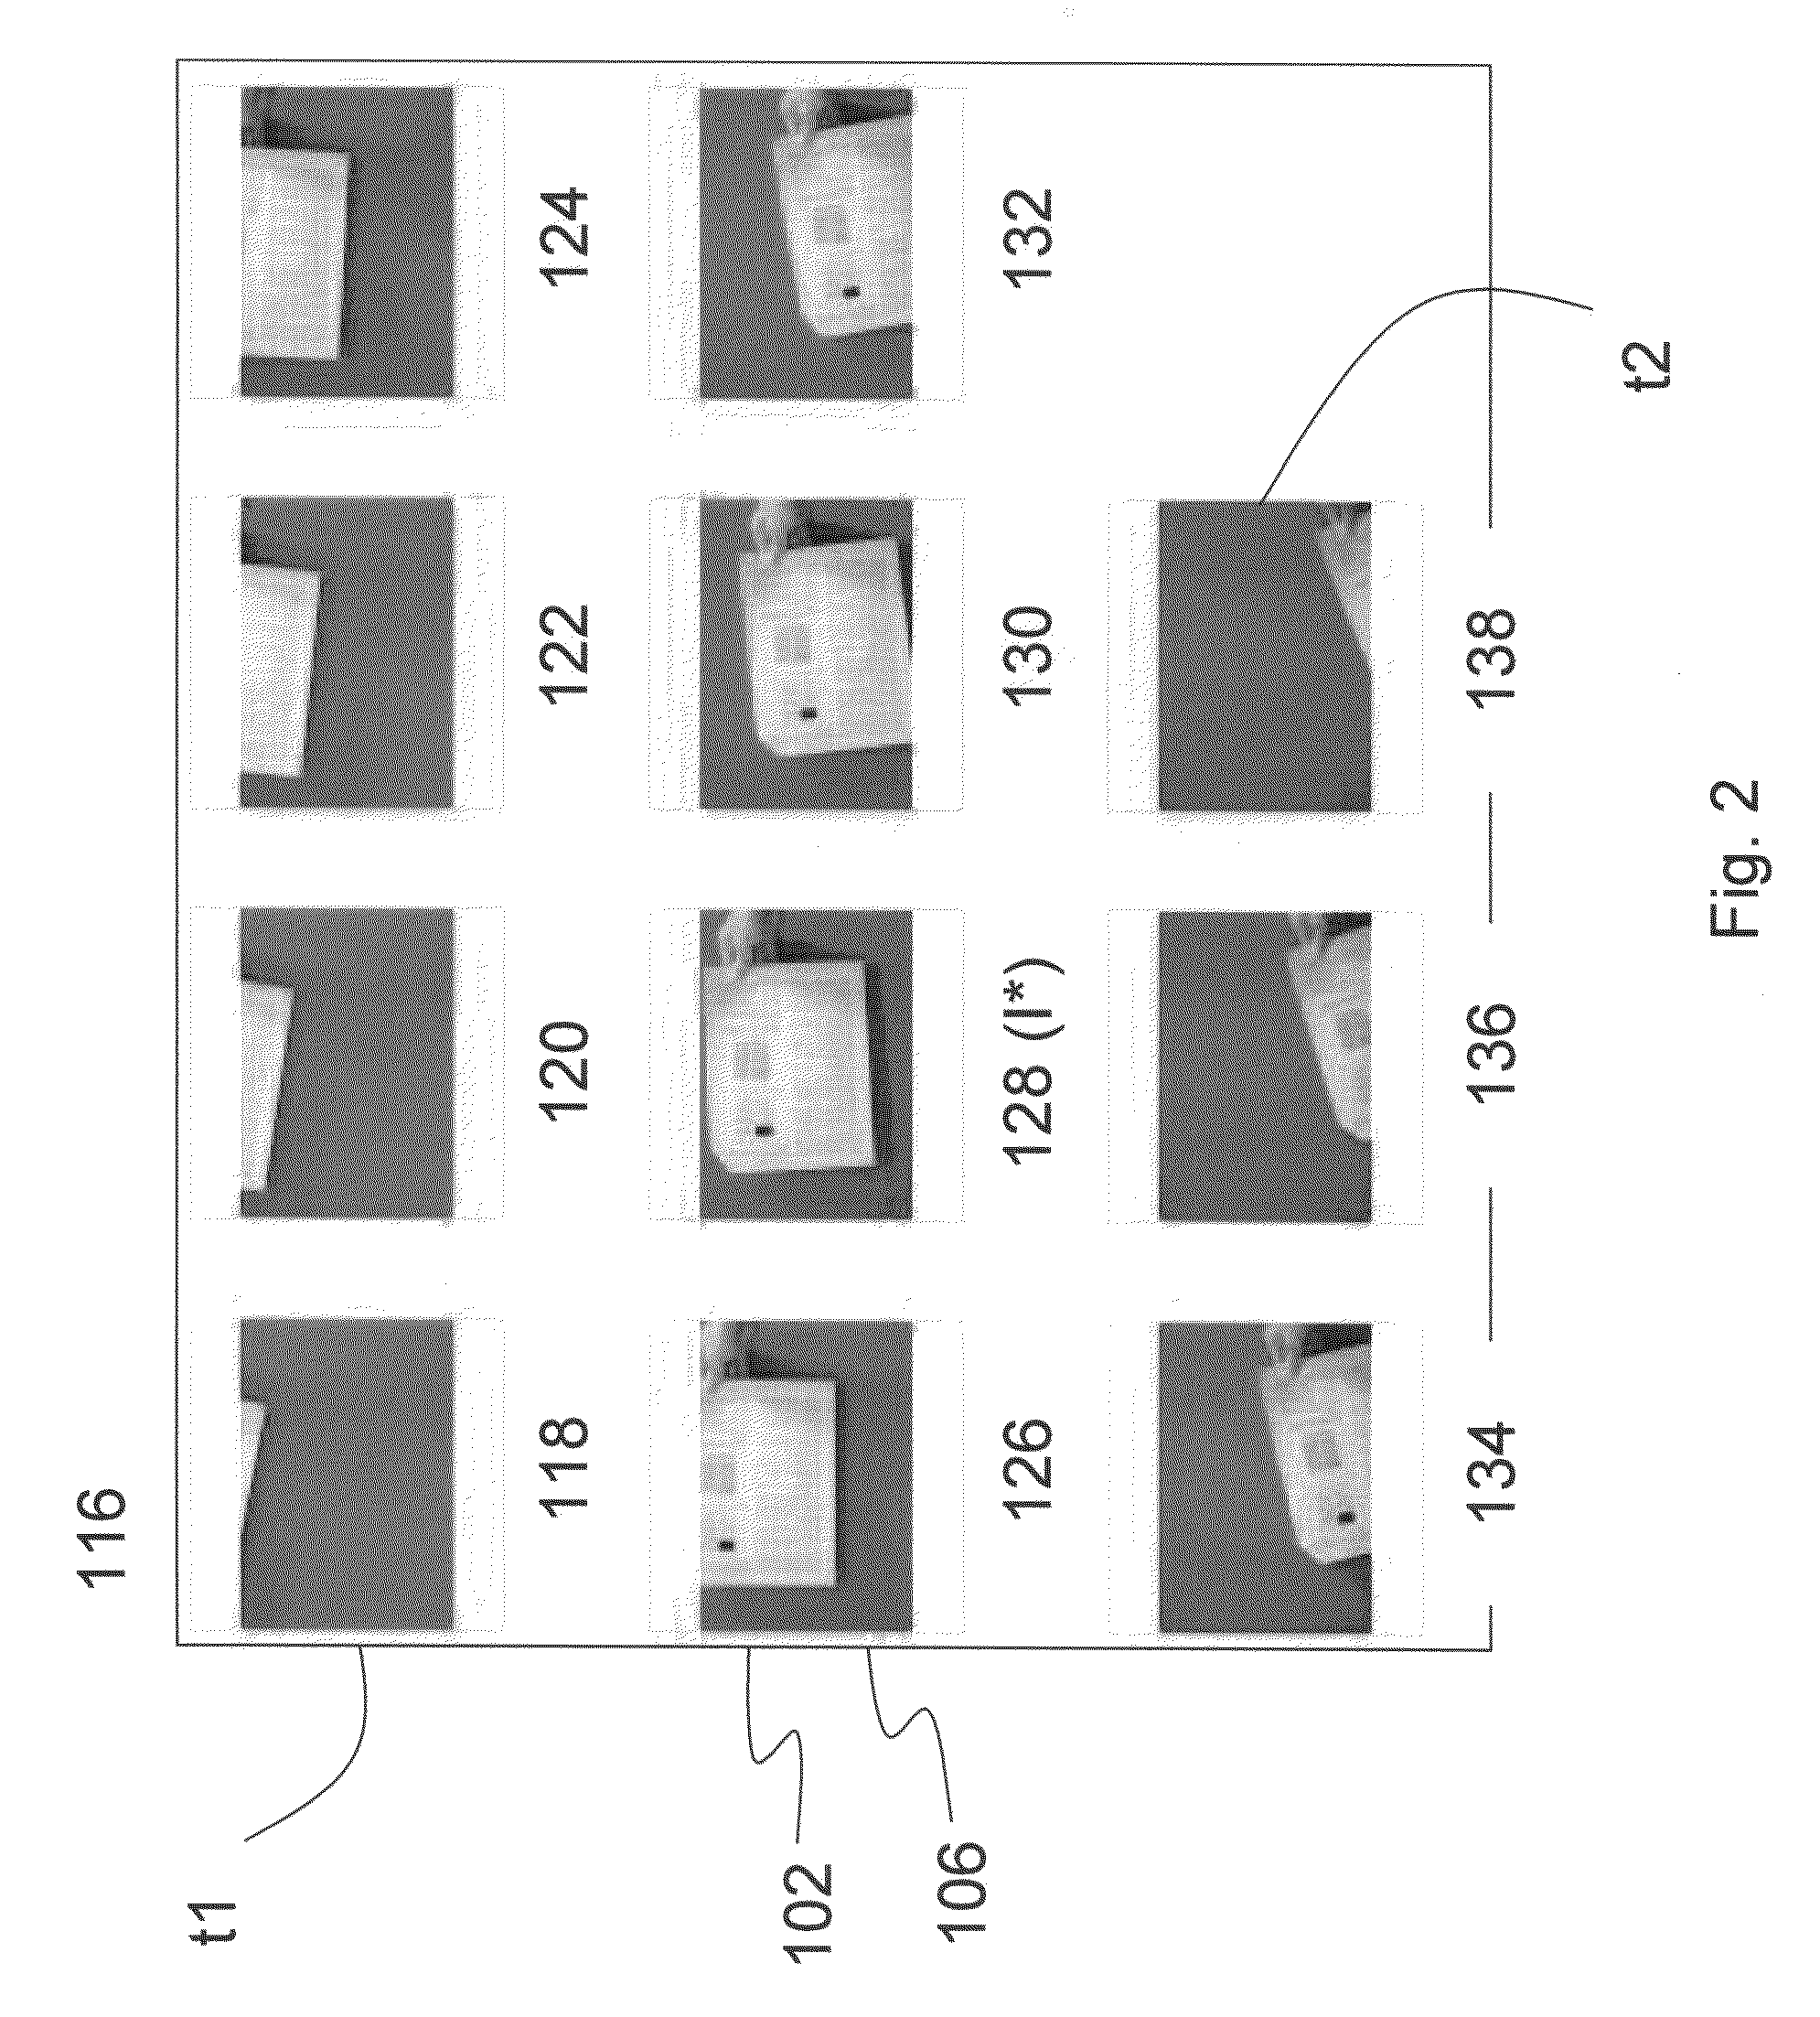 Systems and methods for interactive semi-automatic document scanning